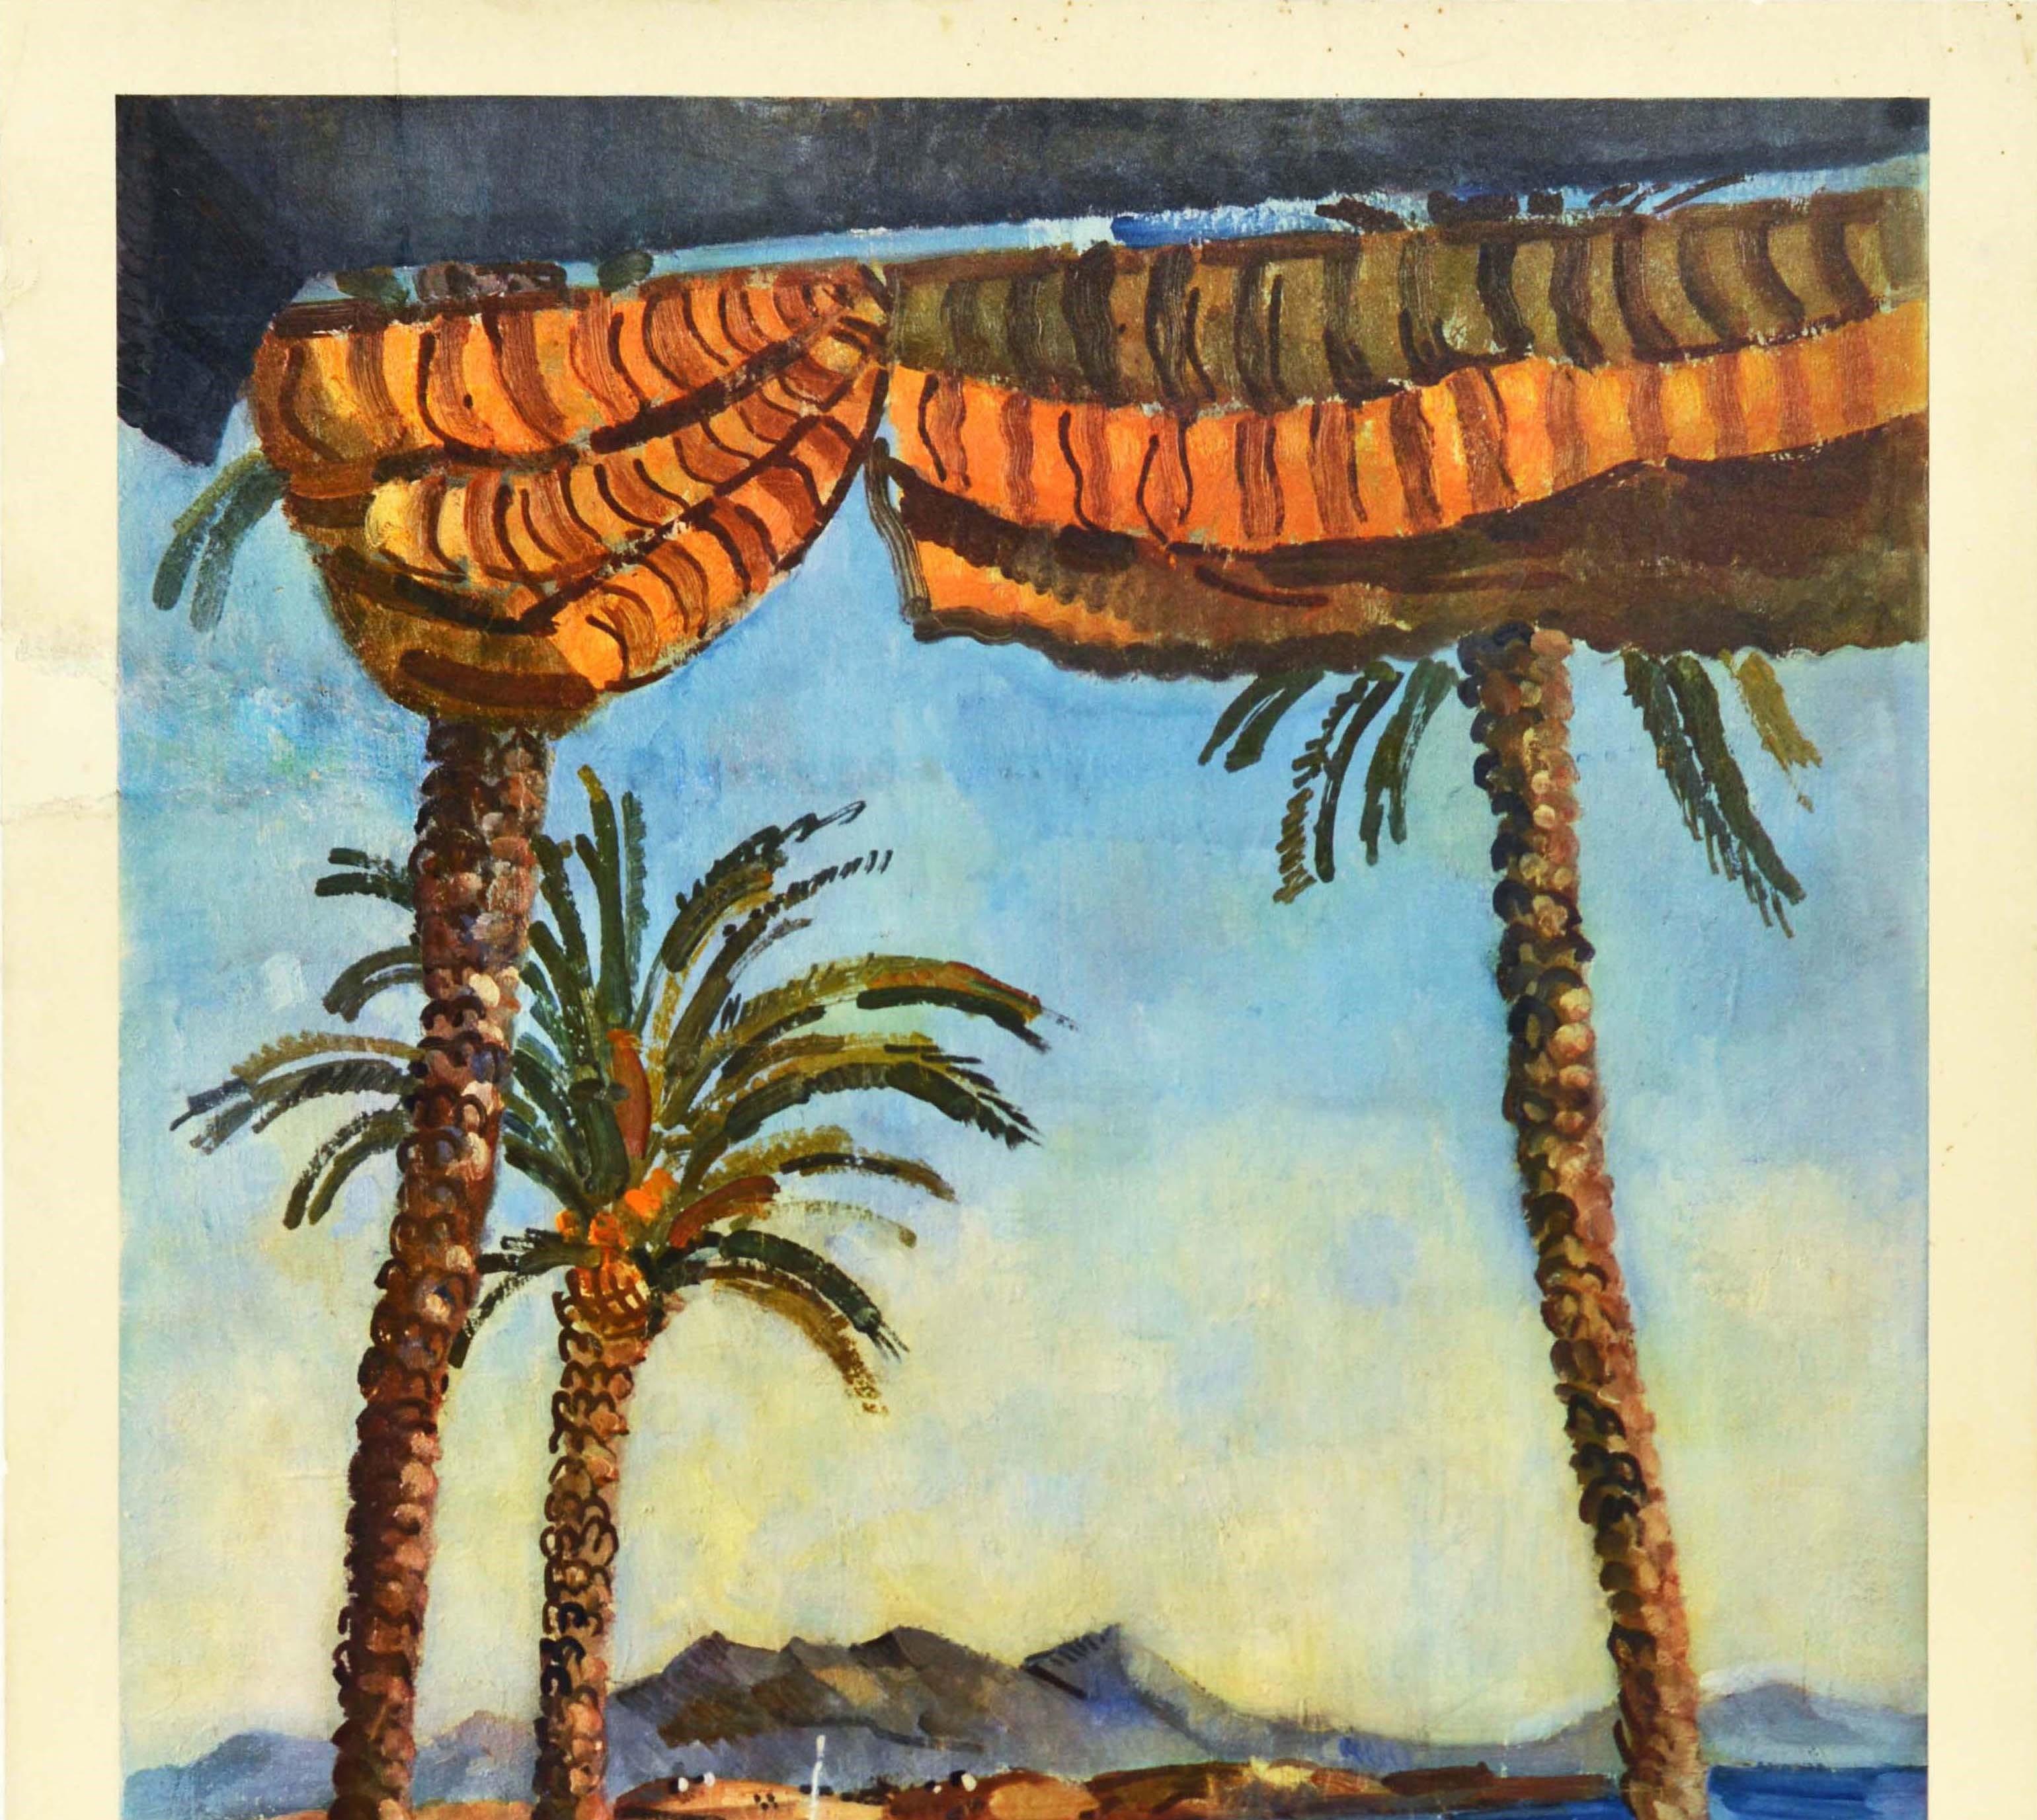 Original vintage SNCF railway travel poster for the Cote d'Azur / French Riviera on the Mediterranean coast featuring a scenic view by the French painter Edmond Ceria (1884-1955) towards hills on the horizon with sailing boats at sea and boats